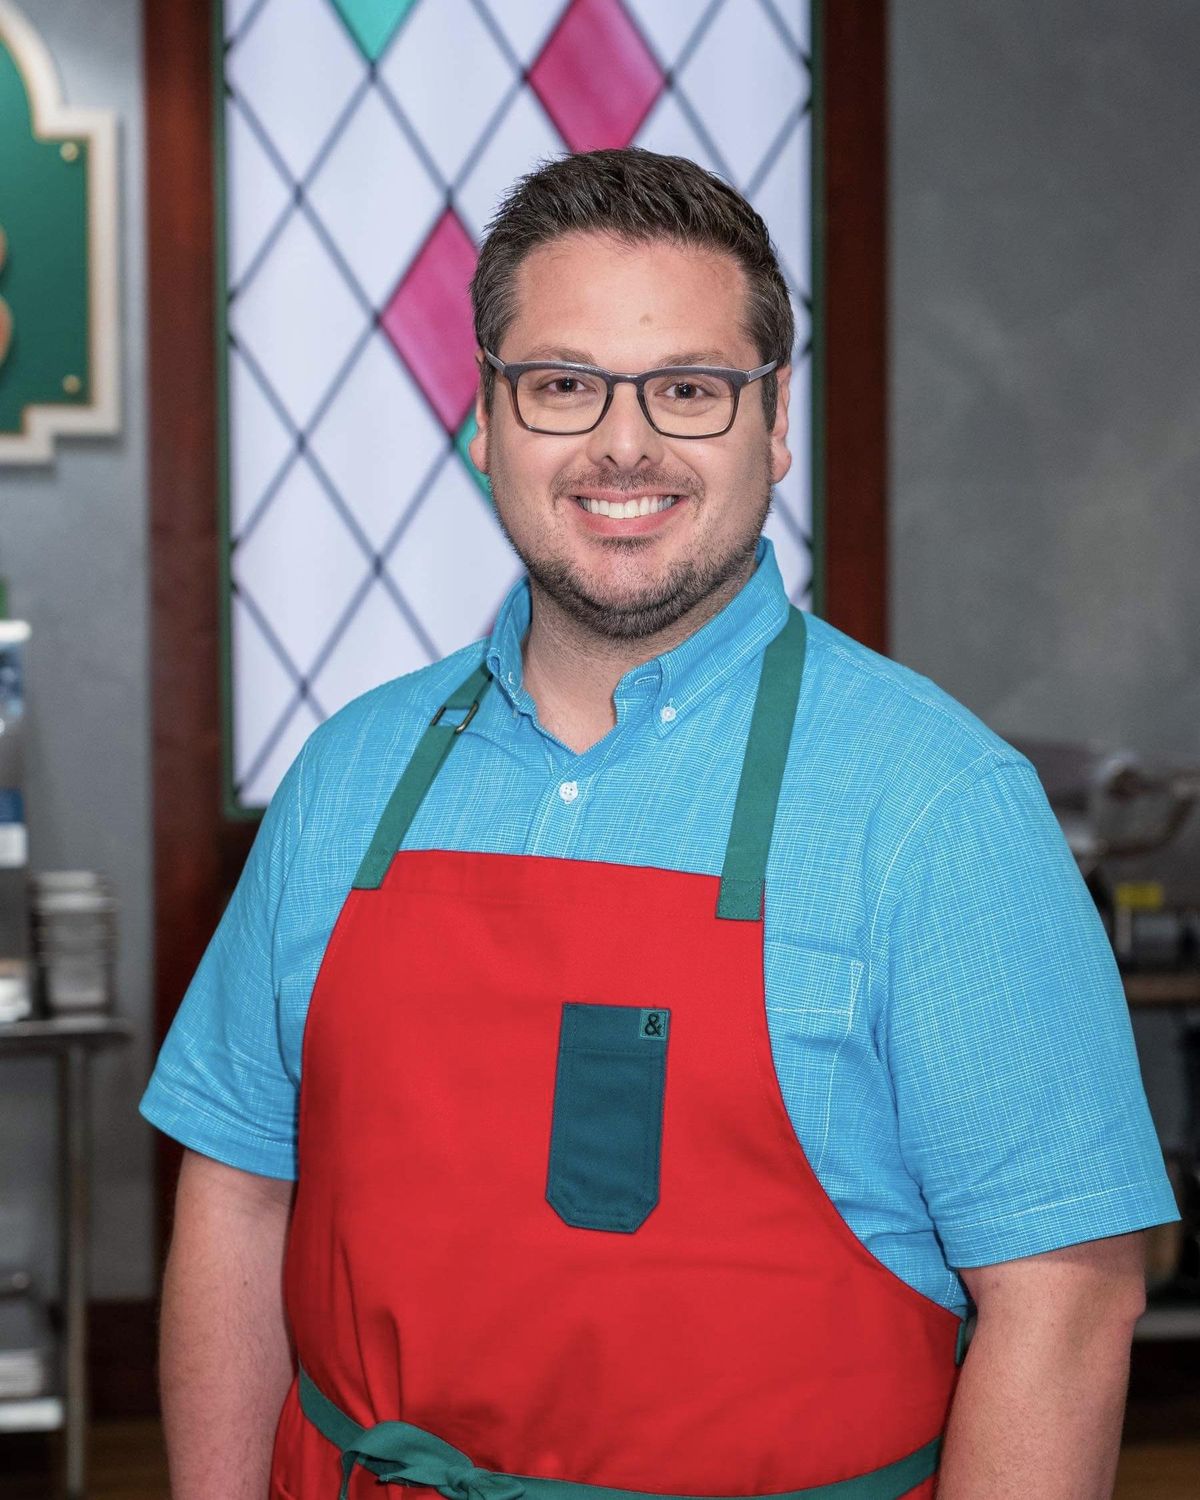 Spokane chef Ricky Webster competed Monday night on Food Network’s “Christmas Cookie Challenge.” (Courtesy of Food Network)